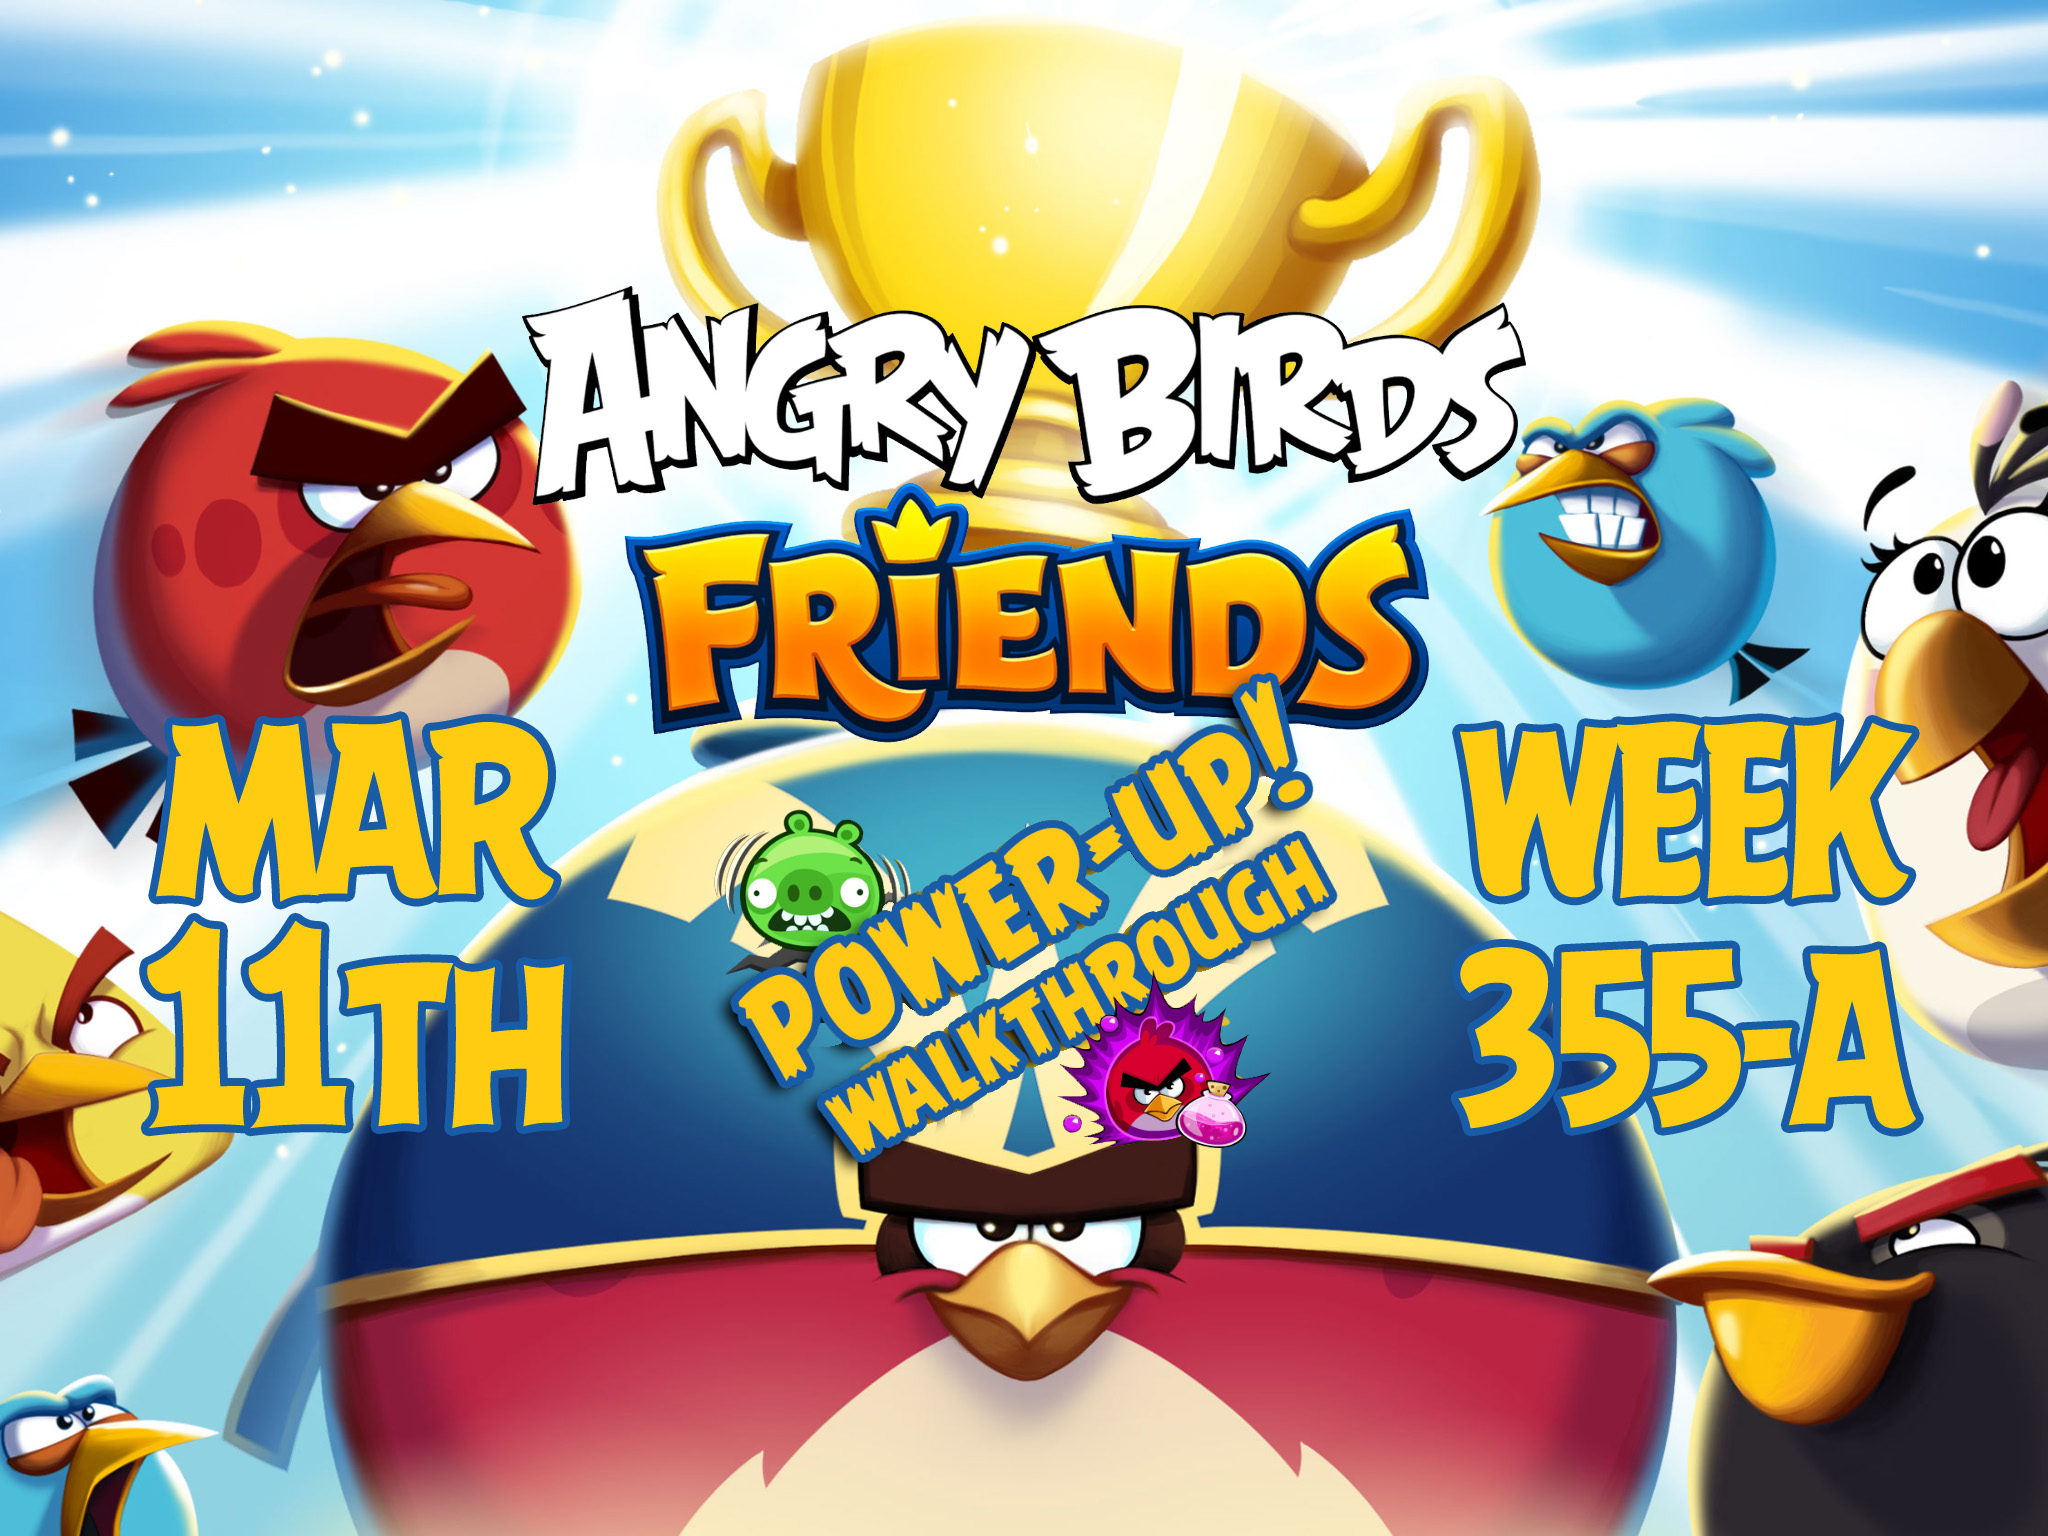 Angry-Birds-Friends-Tournament-Week-355-A-Feature-Image-PU